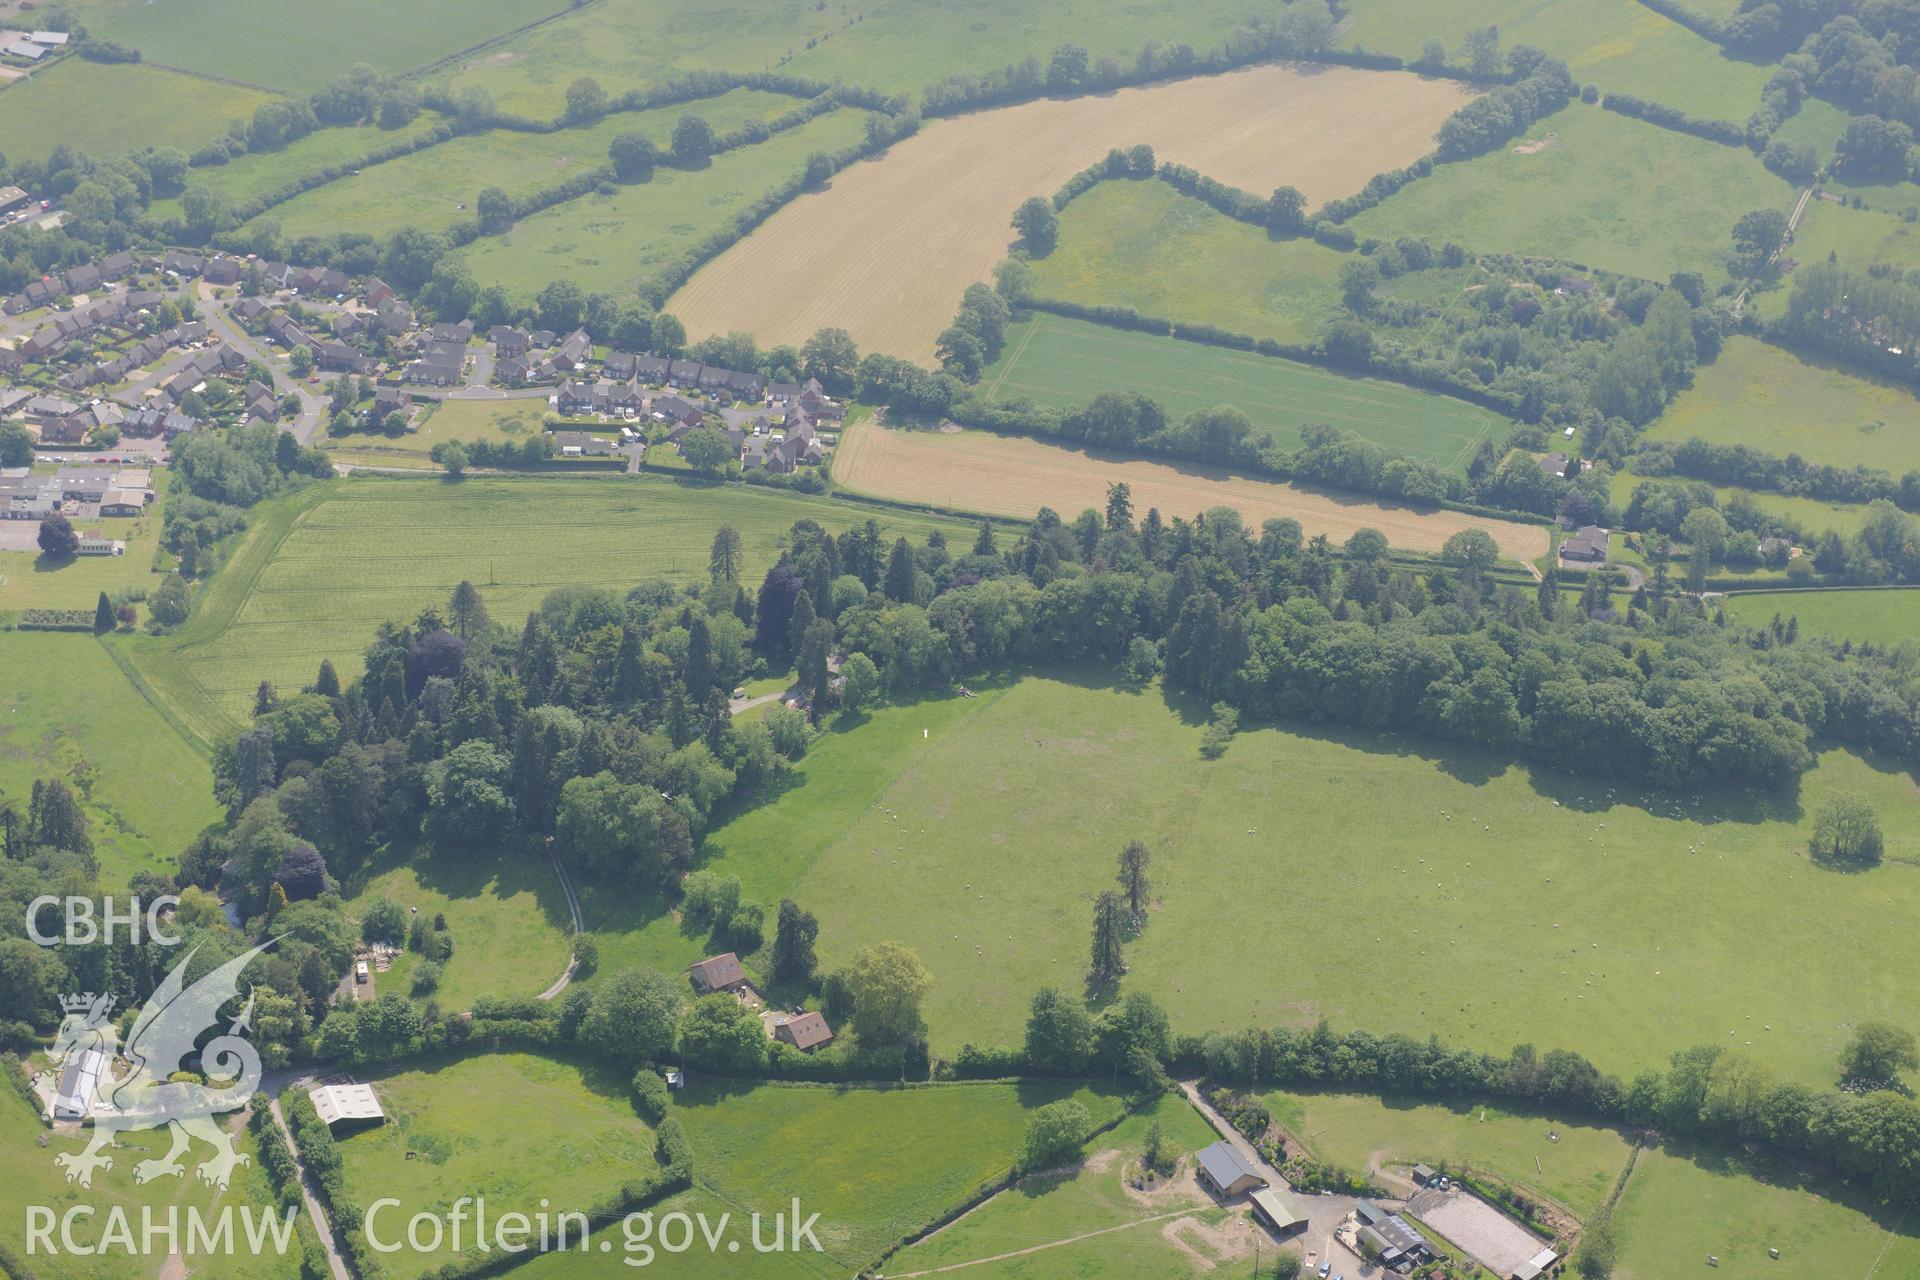 Outskirts of Prestigne town. Oblique aerial photograph taken during the Royal Commission's programme of archaeological aerial reconnaissance by Toby Driver on 11th June 2015.